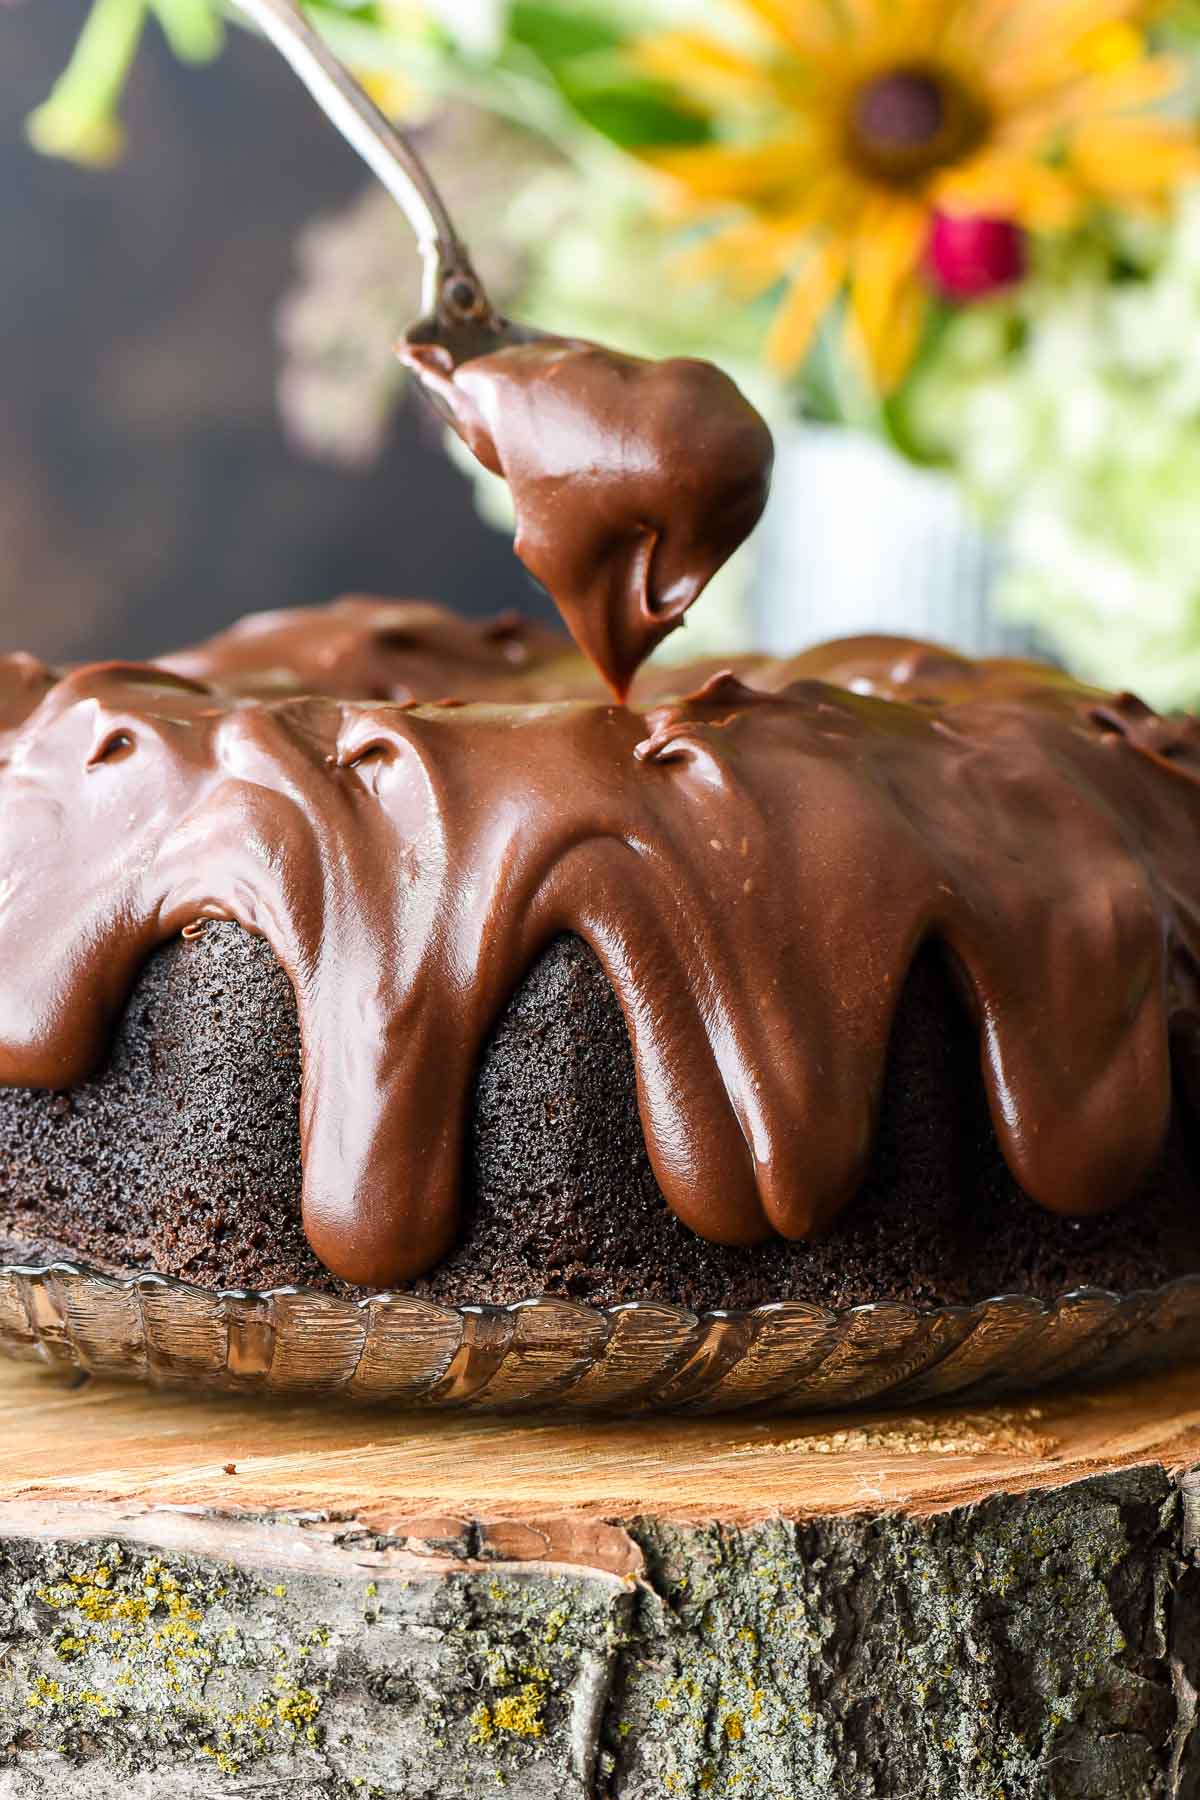 Spoon dolloping chocolate sour cream frosting onto a chocolate bundt cake.